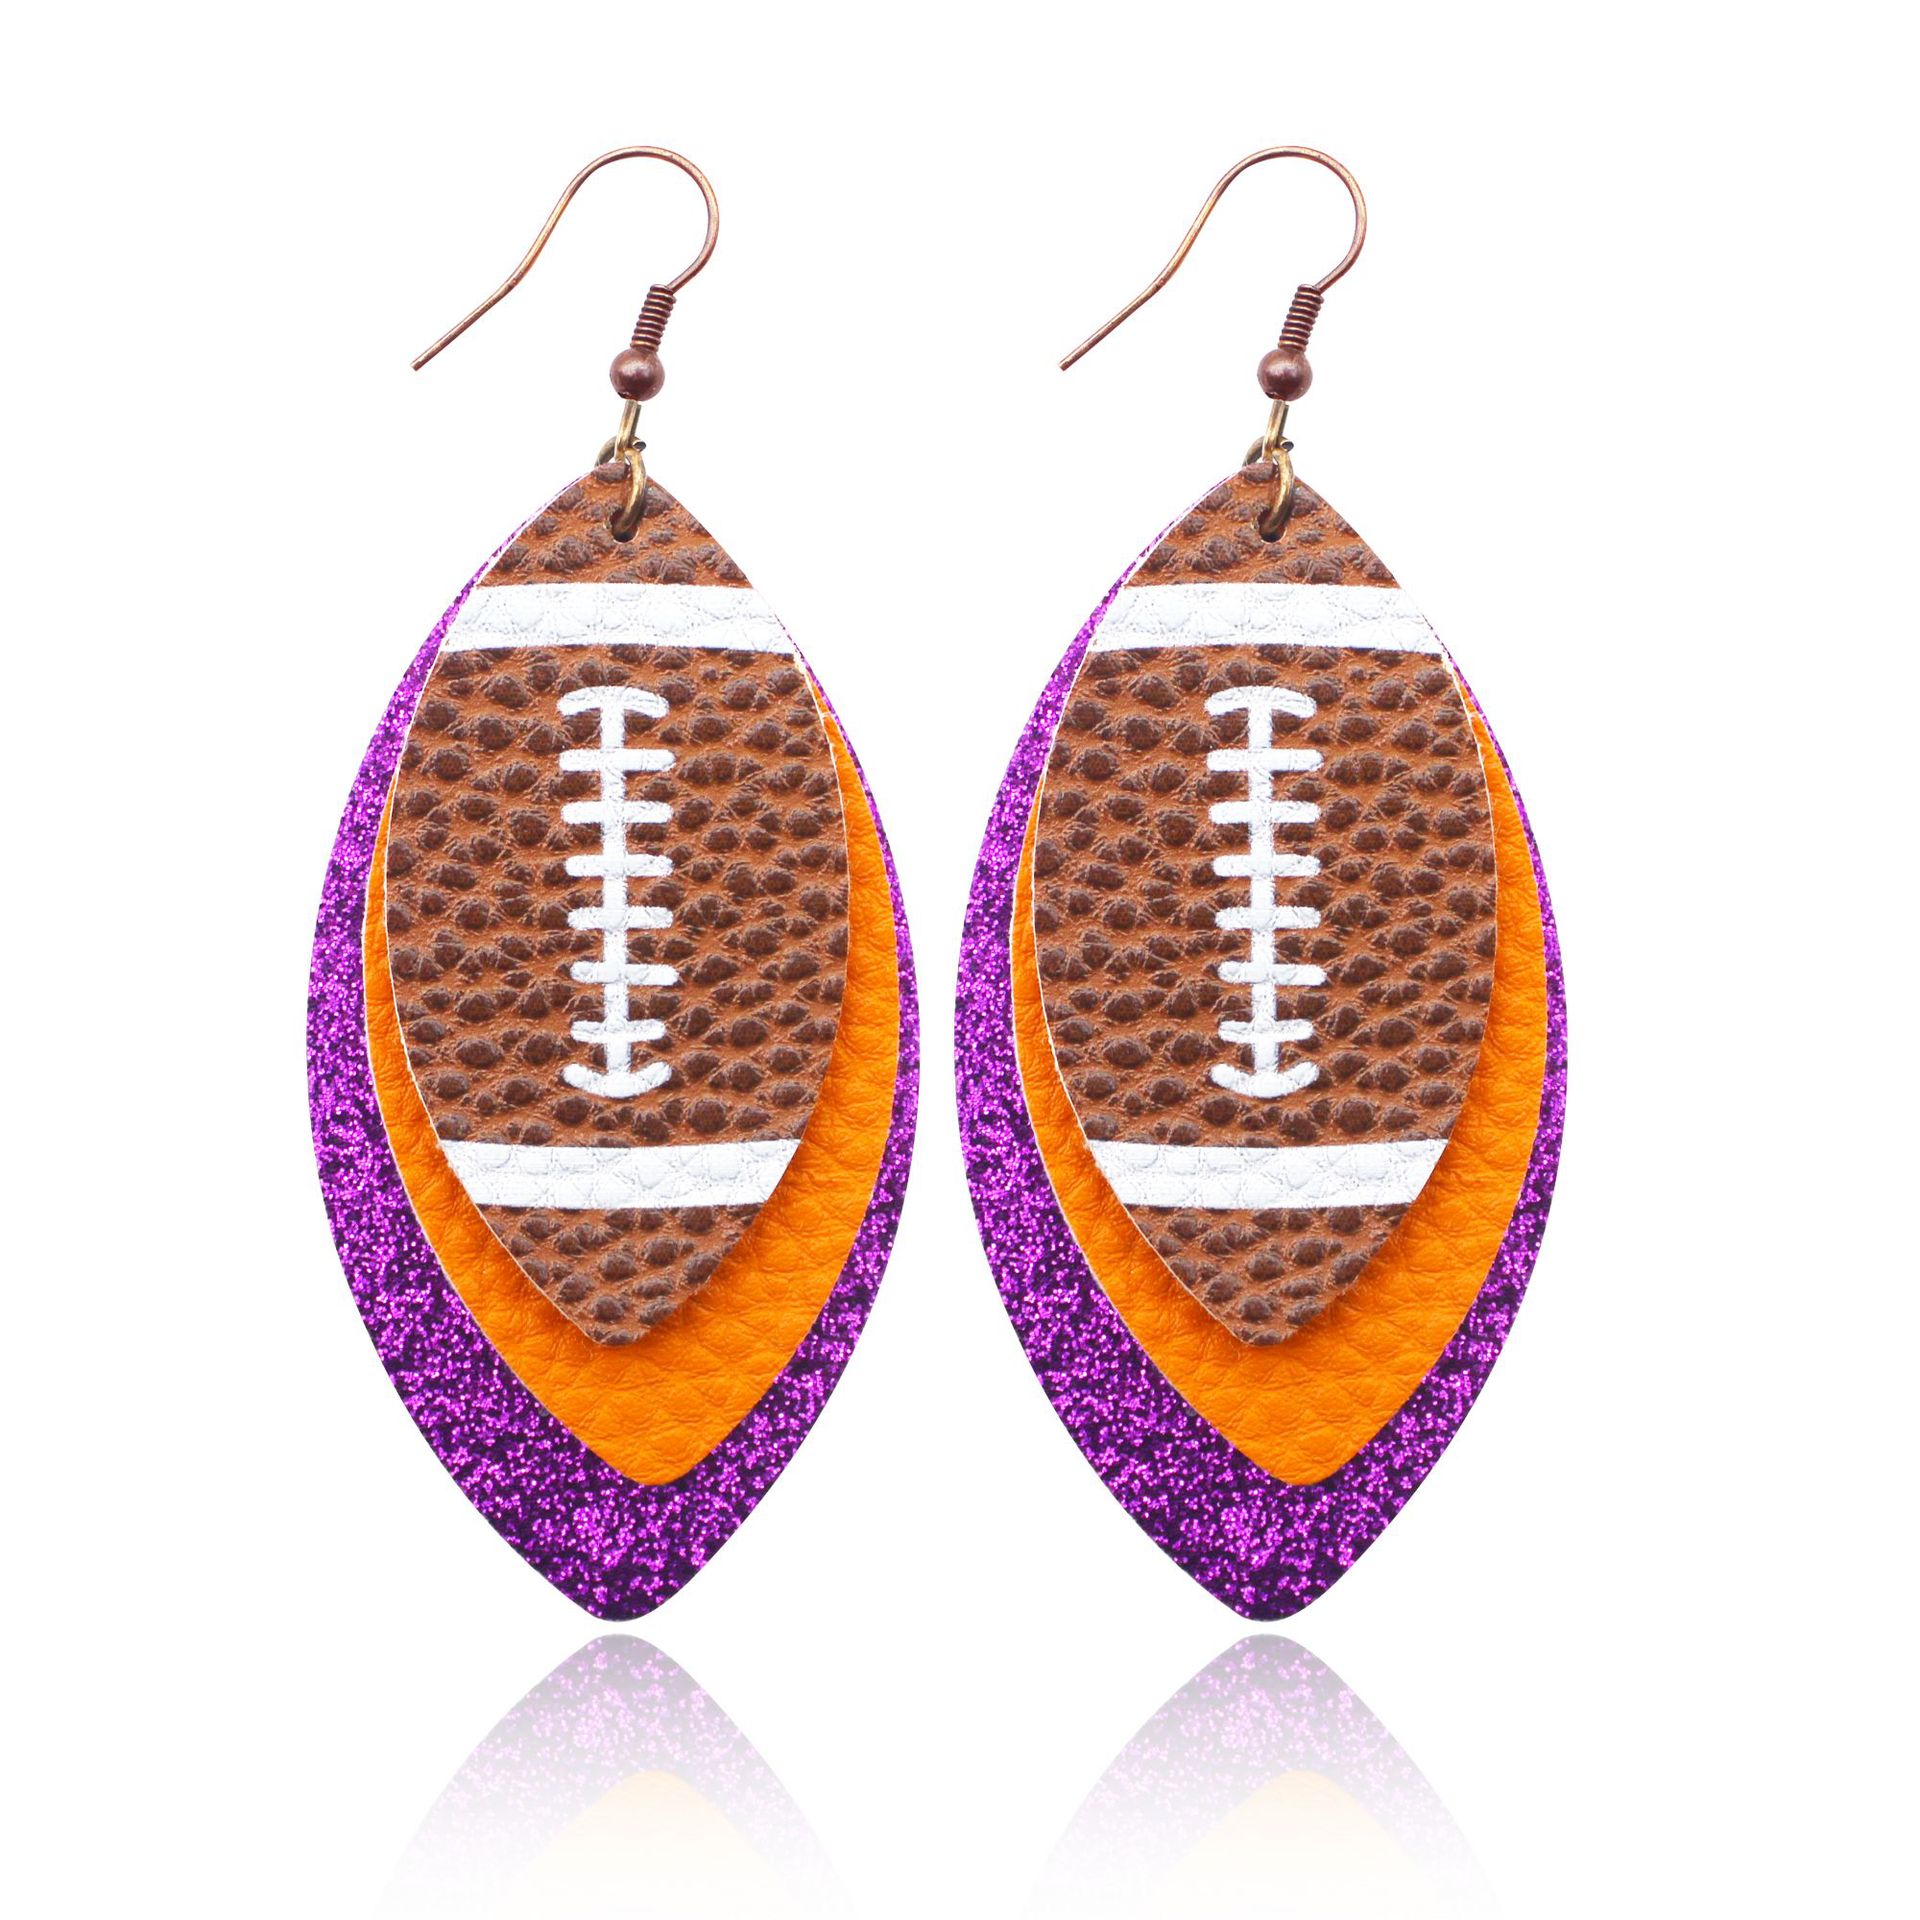 Sports Style Rugby Brown Leopard Print Leaves Three-Layer Leather Spot Drill Rugby Earrings Europe and America Cross Border Amazon